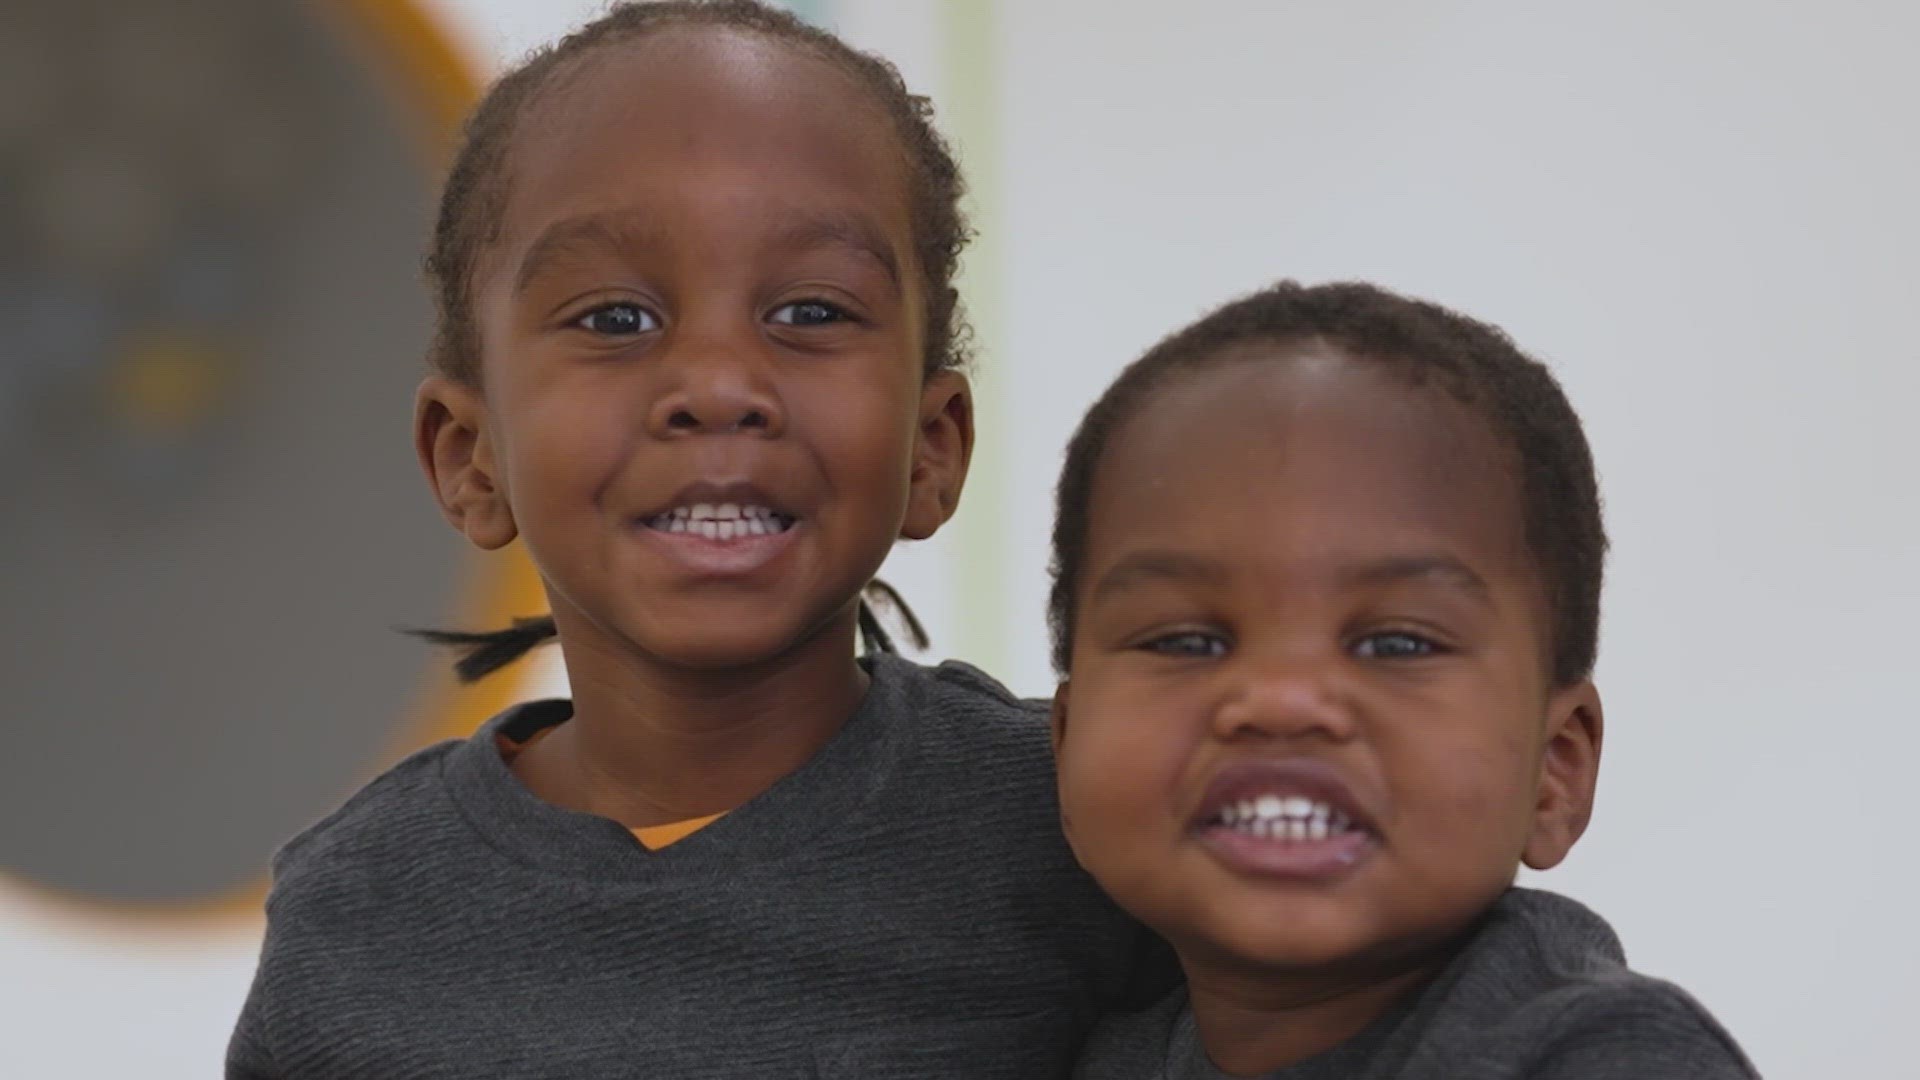 The brother's foster advocate says whoever adopts these children will have double the blessings.